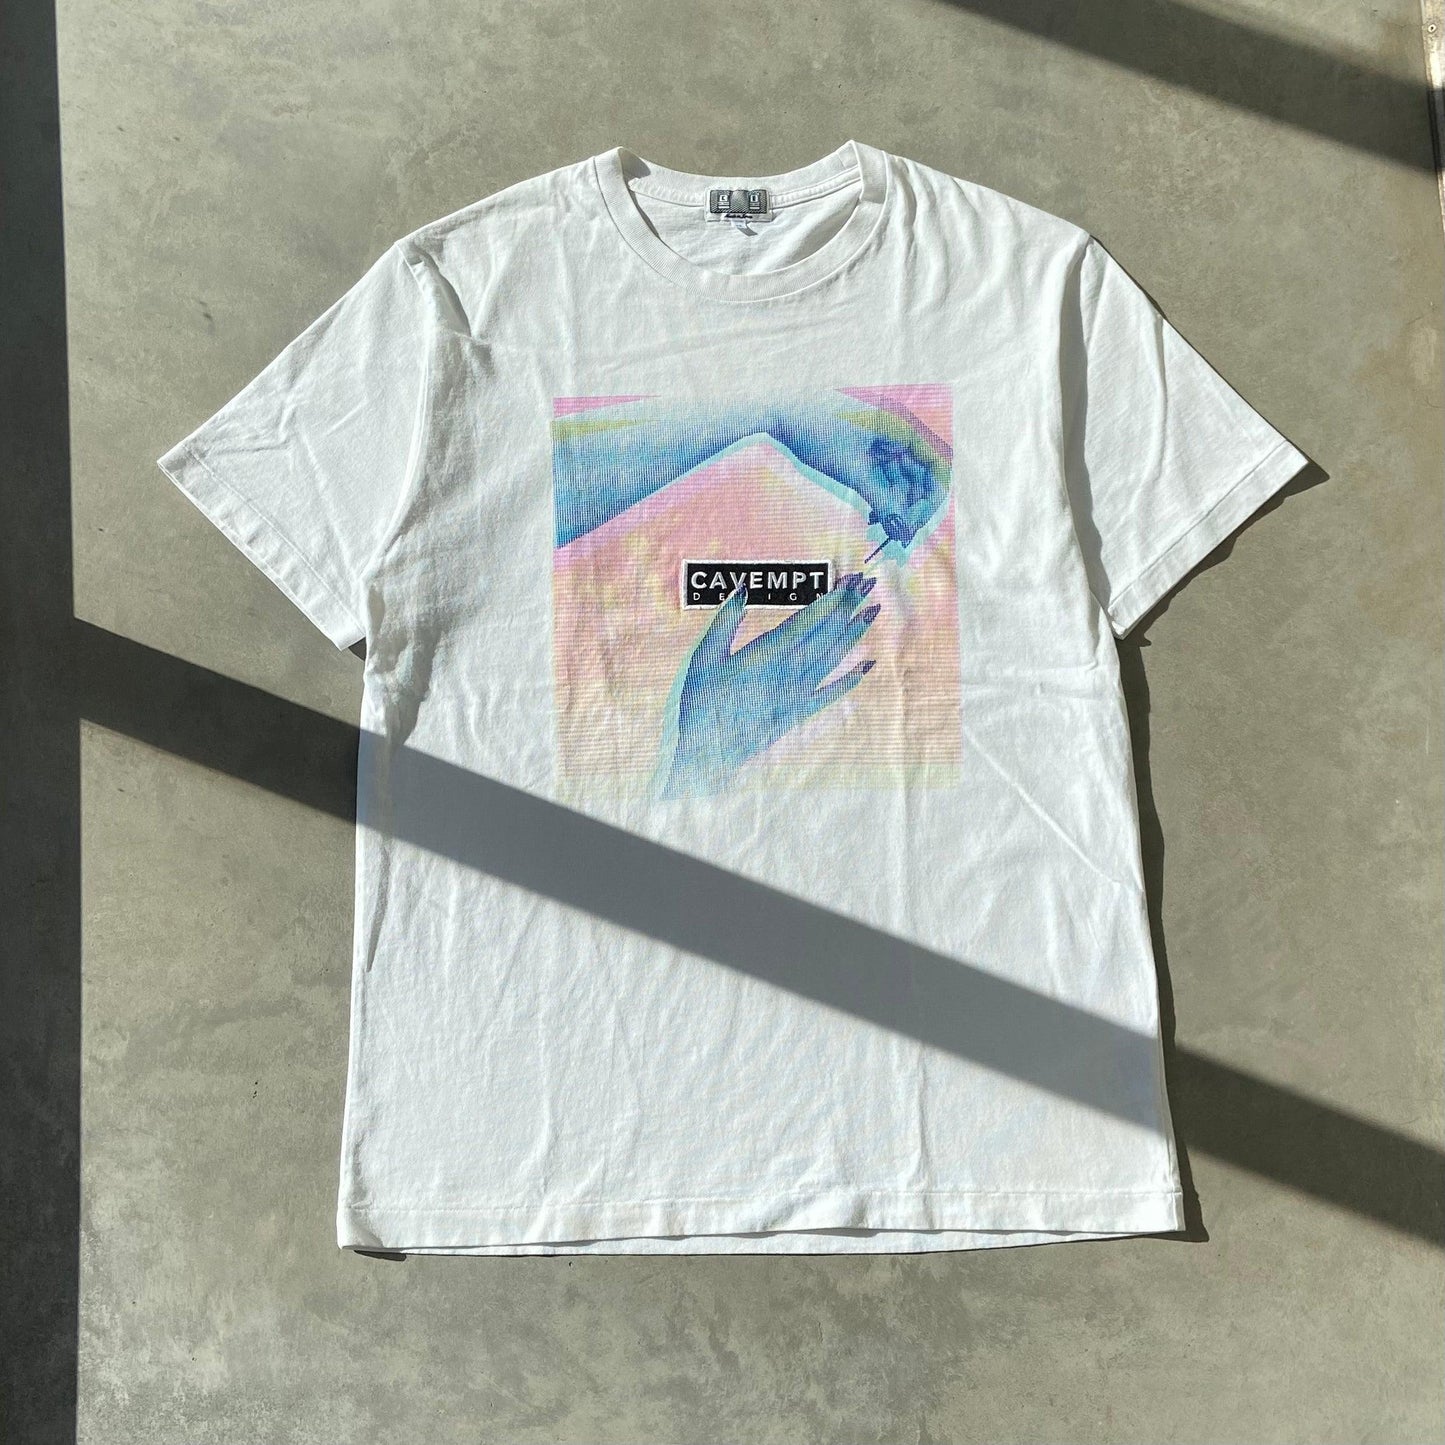 CAV EMPT ‘NAILS’ GRAPHIC TEE - XL - Known Source